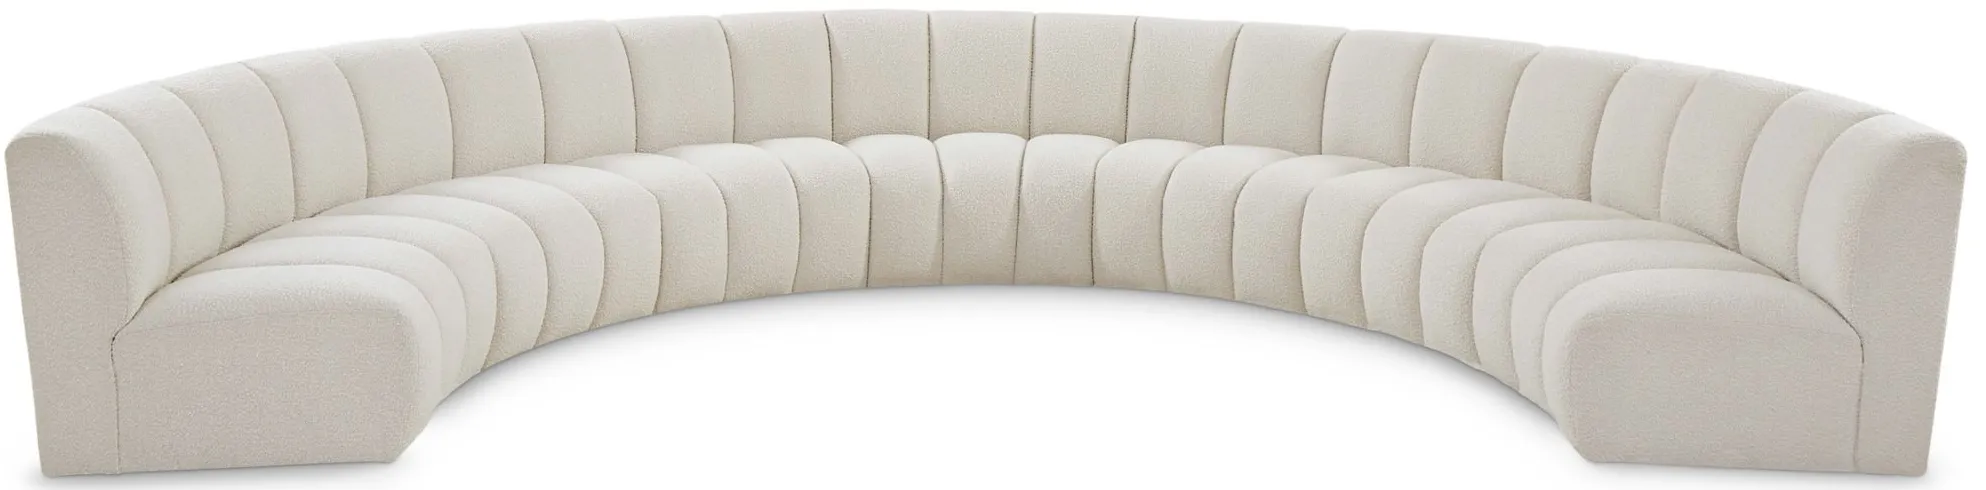 Infinity 7pc. Modular Sectional in Cream by Meridian Furniture